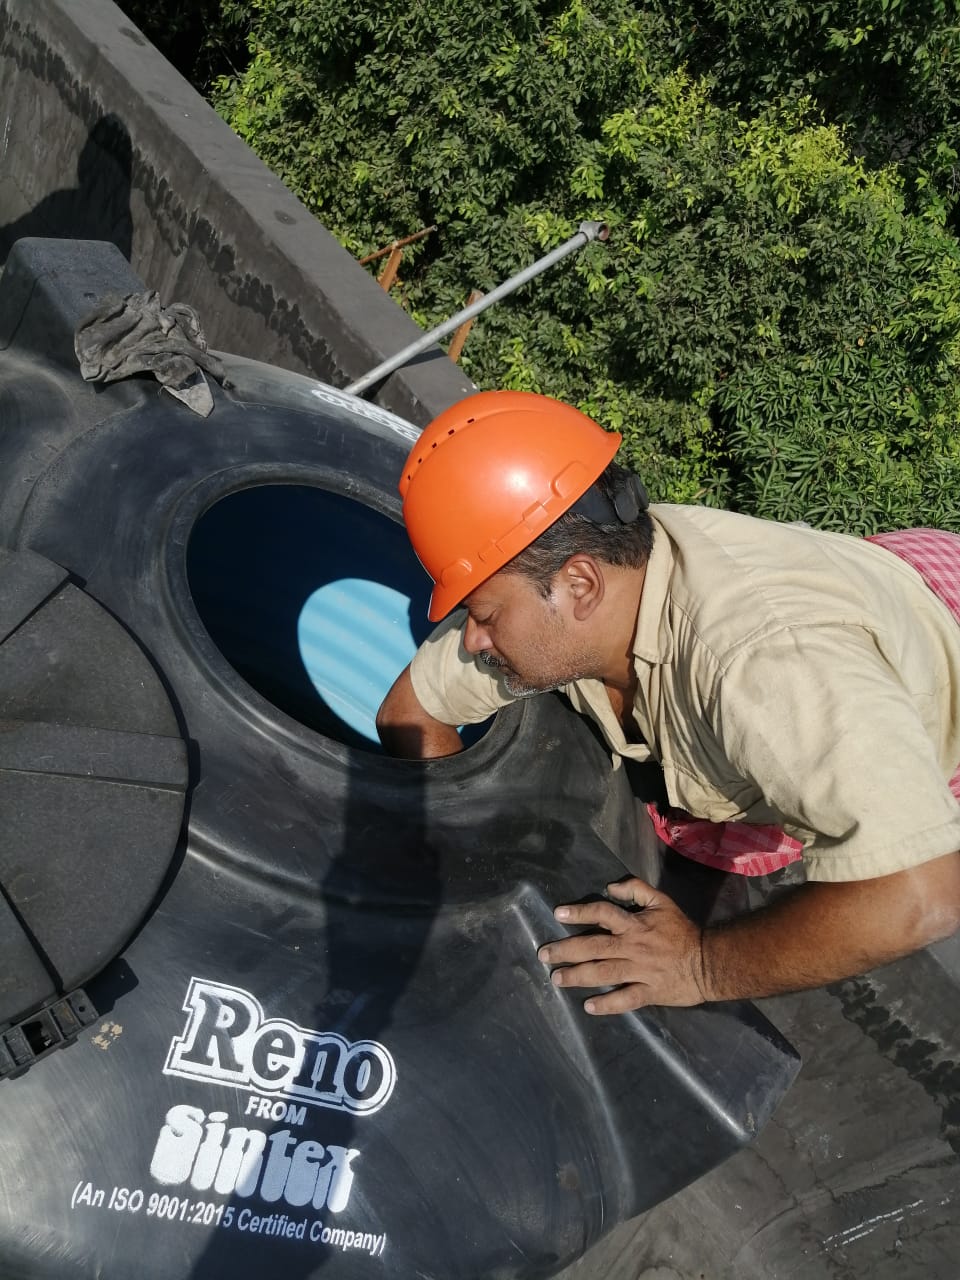 Cleaning of Overhead Water Tanks & Water Reservoir across Units on 02 Dec 23